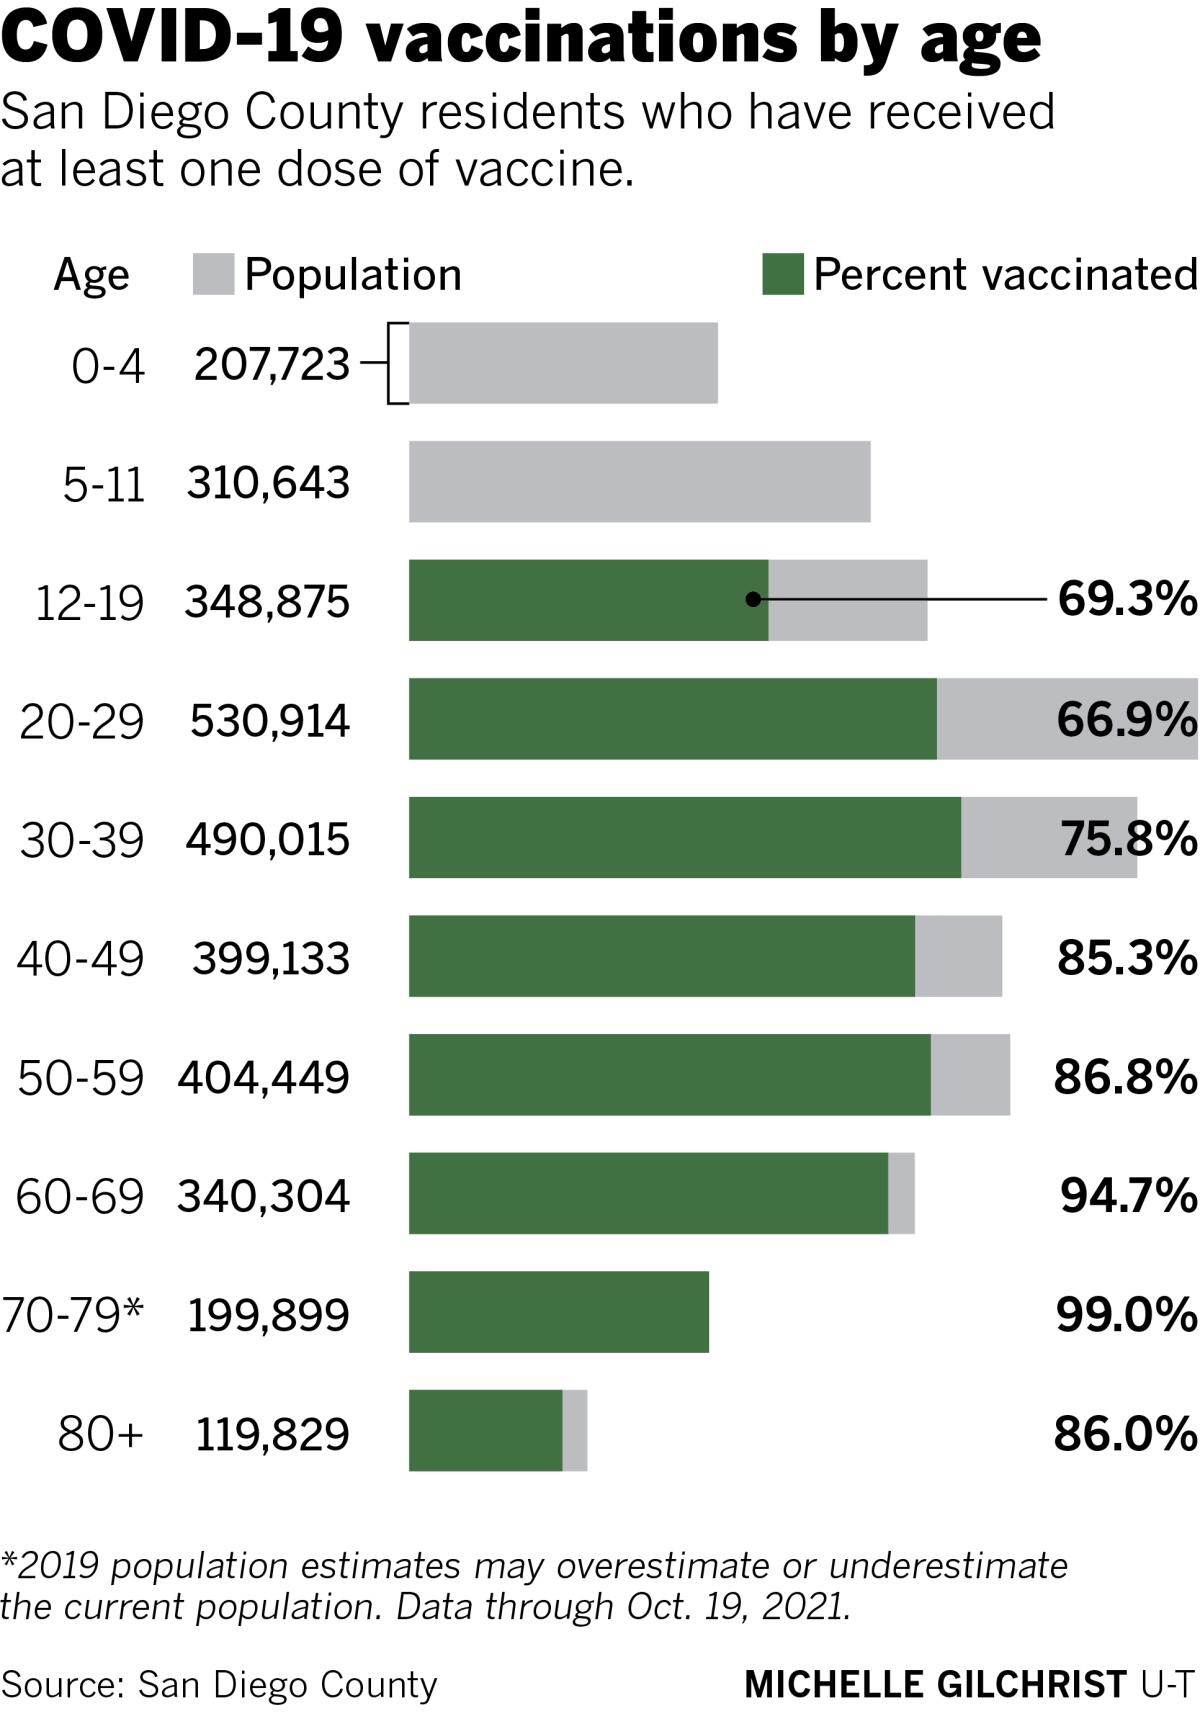 COVID-19 vaccinations by age